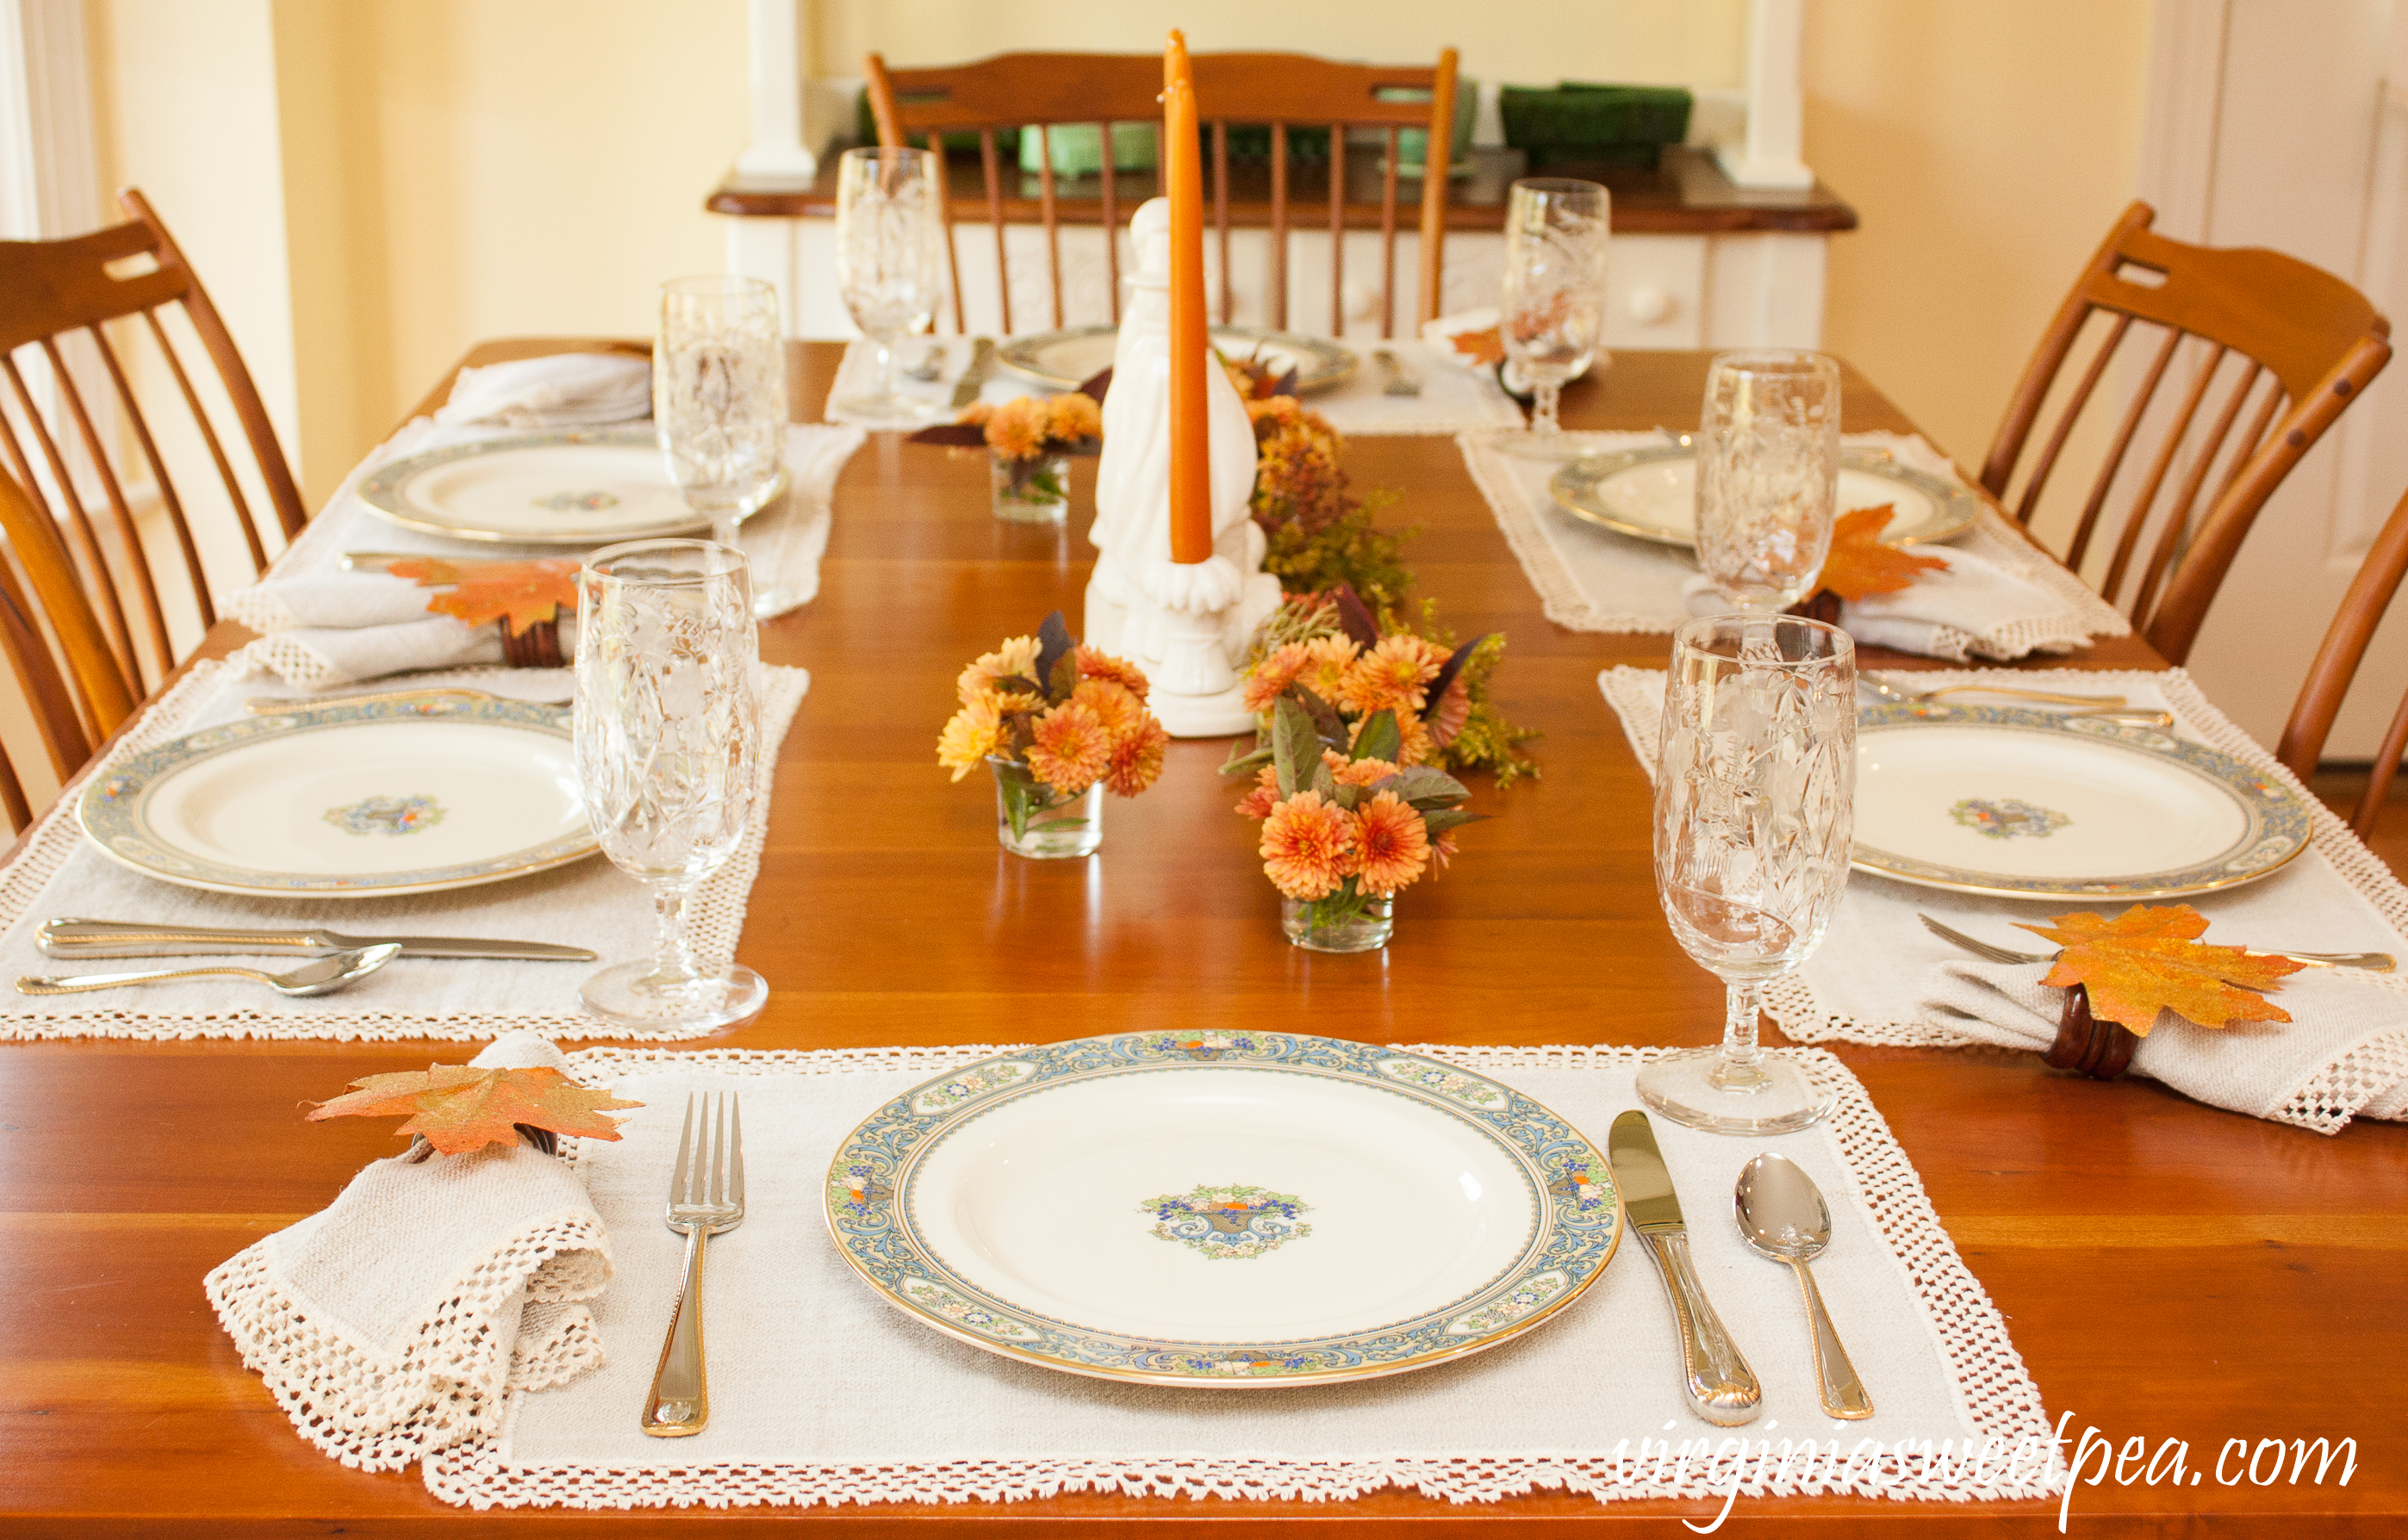 We Gather Together Thanksgiving Table - Get ideas for setting your table for Thanksgiving from 20+ bloggers. #thanksgivingdecor #thanksgiving #vintagepilgrims #thanksgivingtablescape